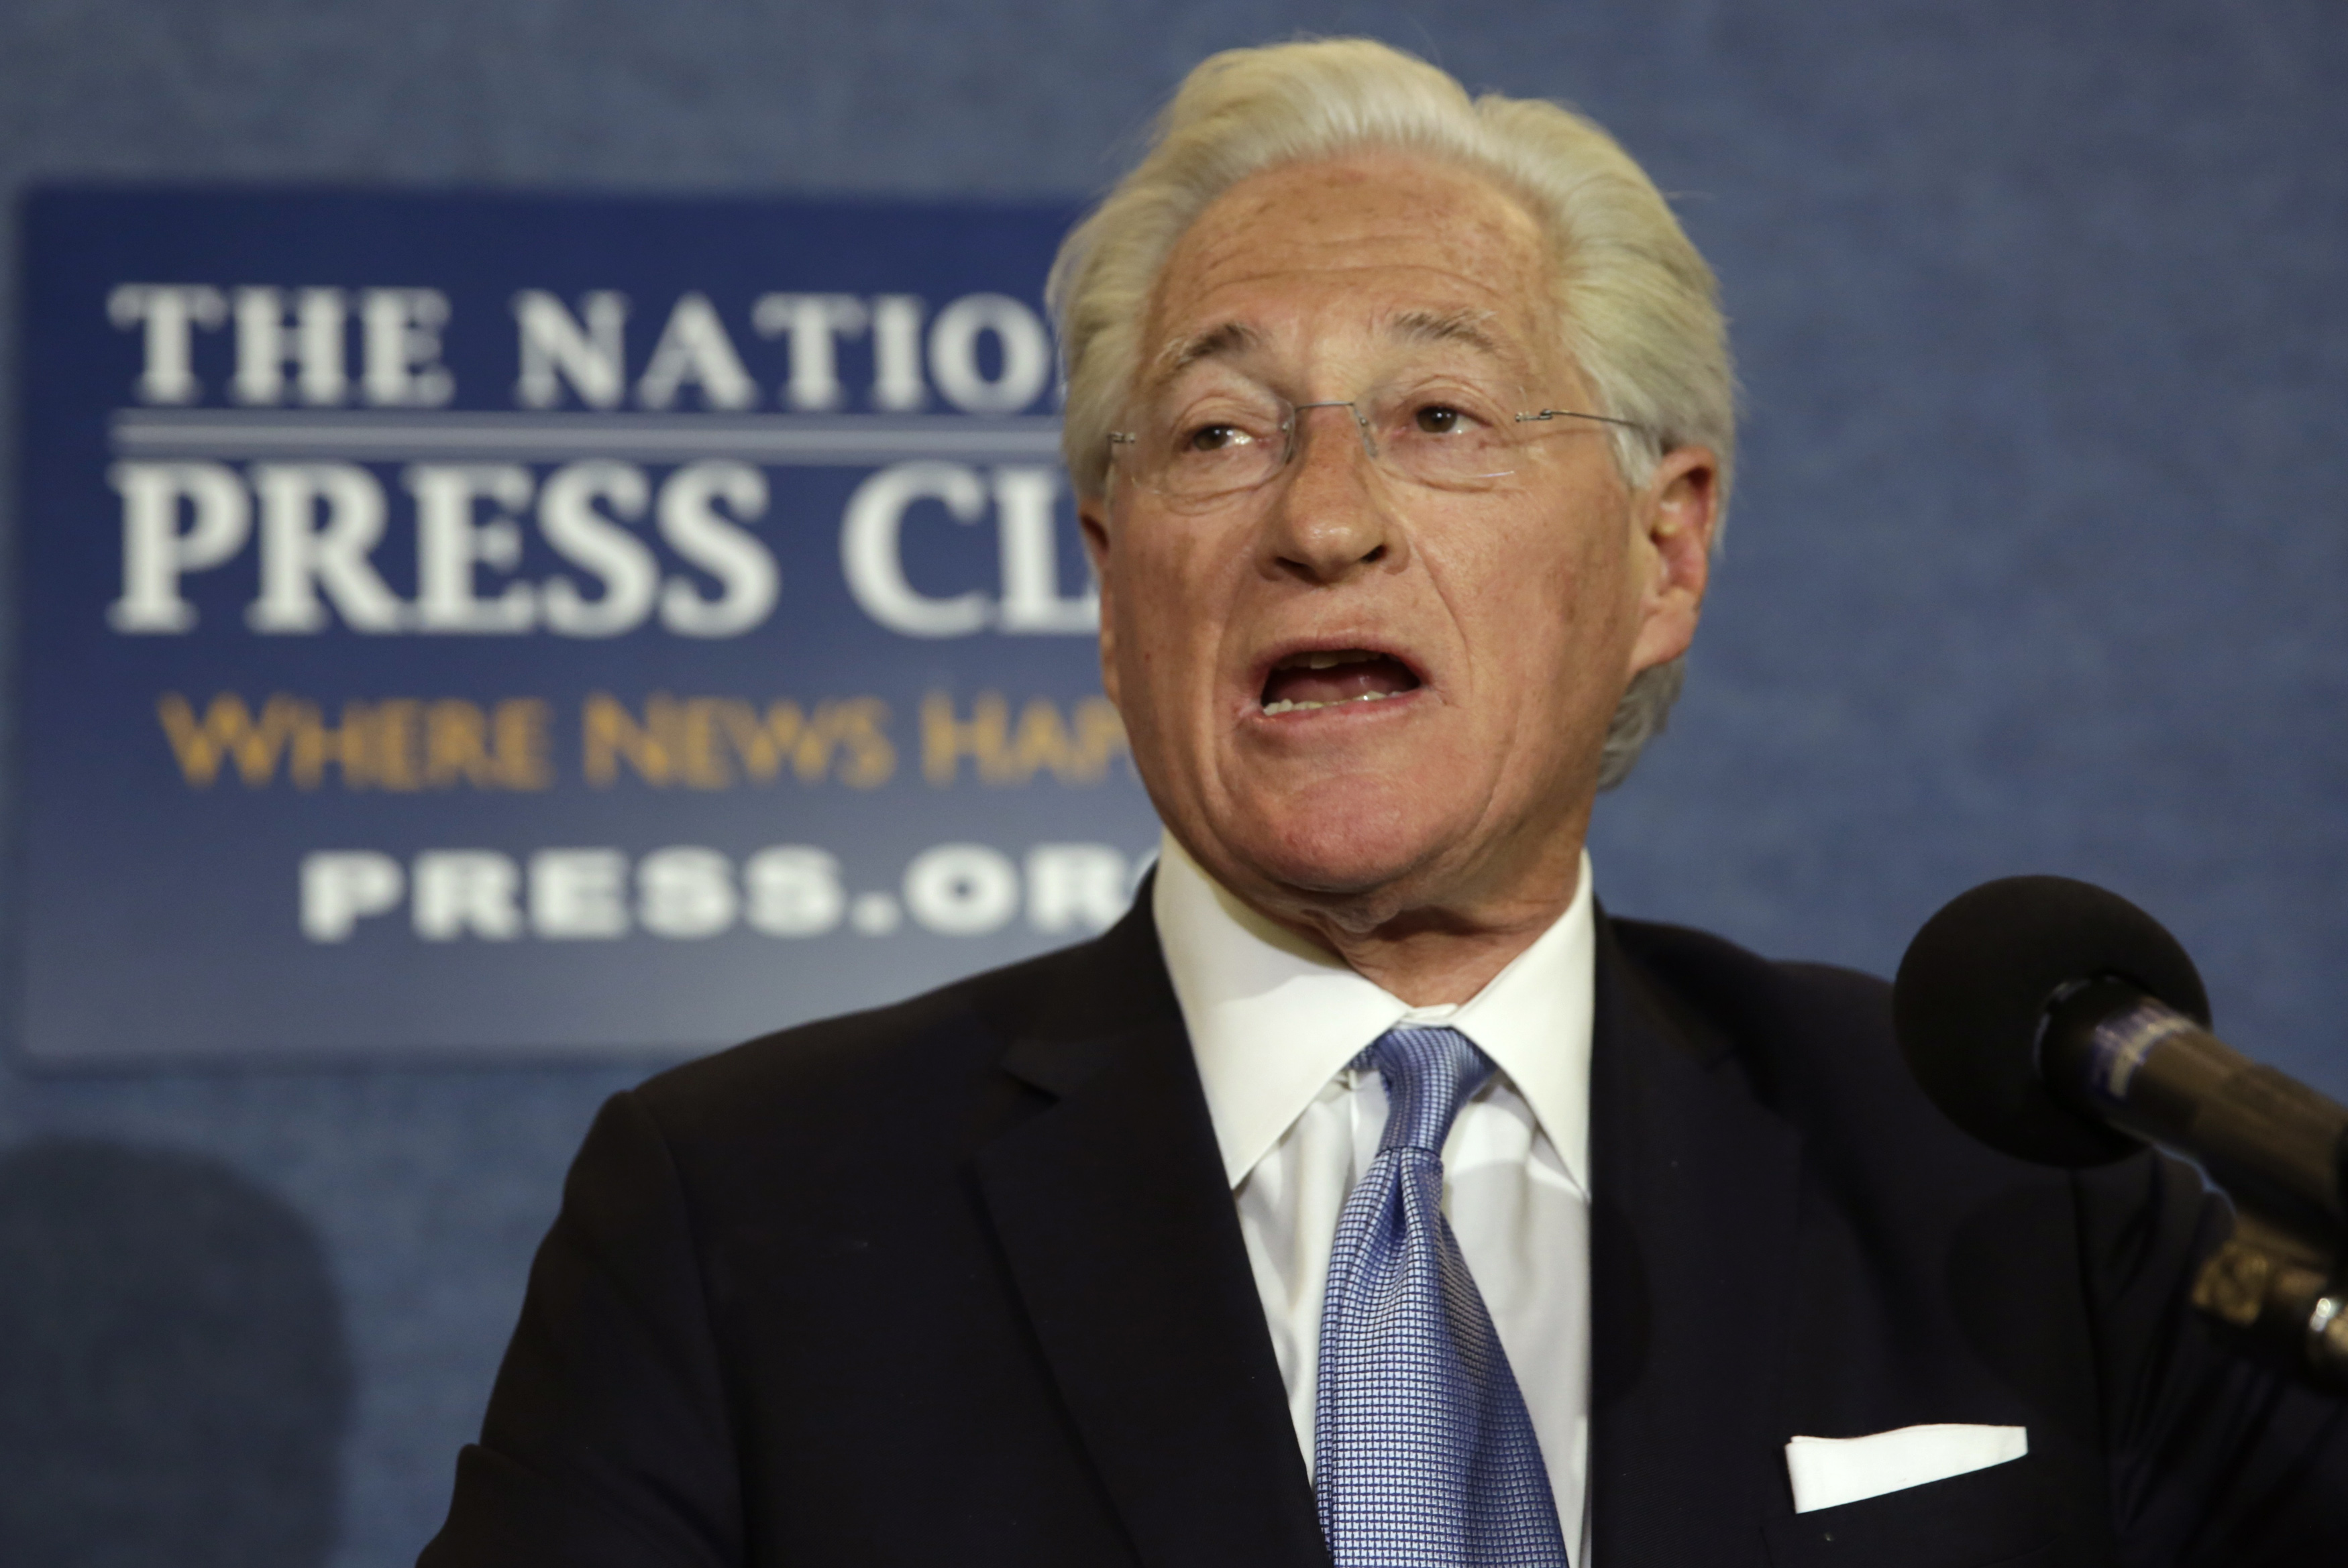 U.S. President Donald Trump's personal attorney, Marc Kasowitz, speaks to the news media after the congressional testimony of former FBI Director James Comey, at the National Press Club in Washington, U.S. June 8, 2017. (Yuri Gripas&mdash;REUTERS)